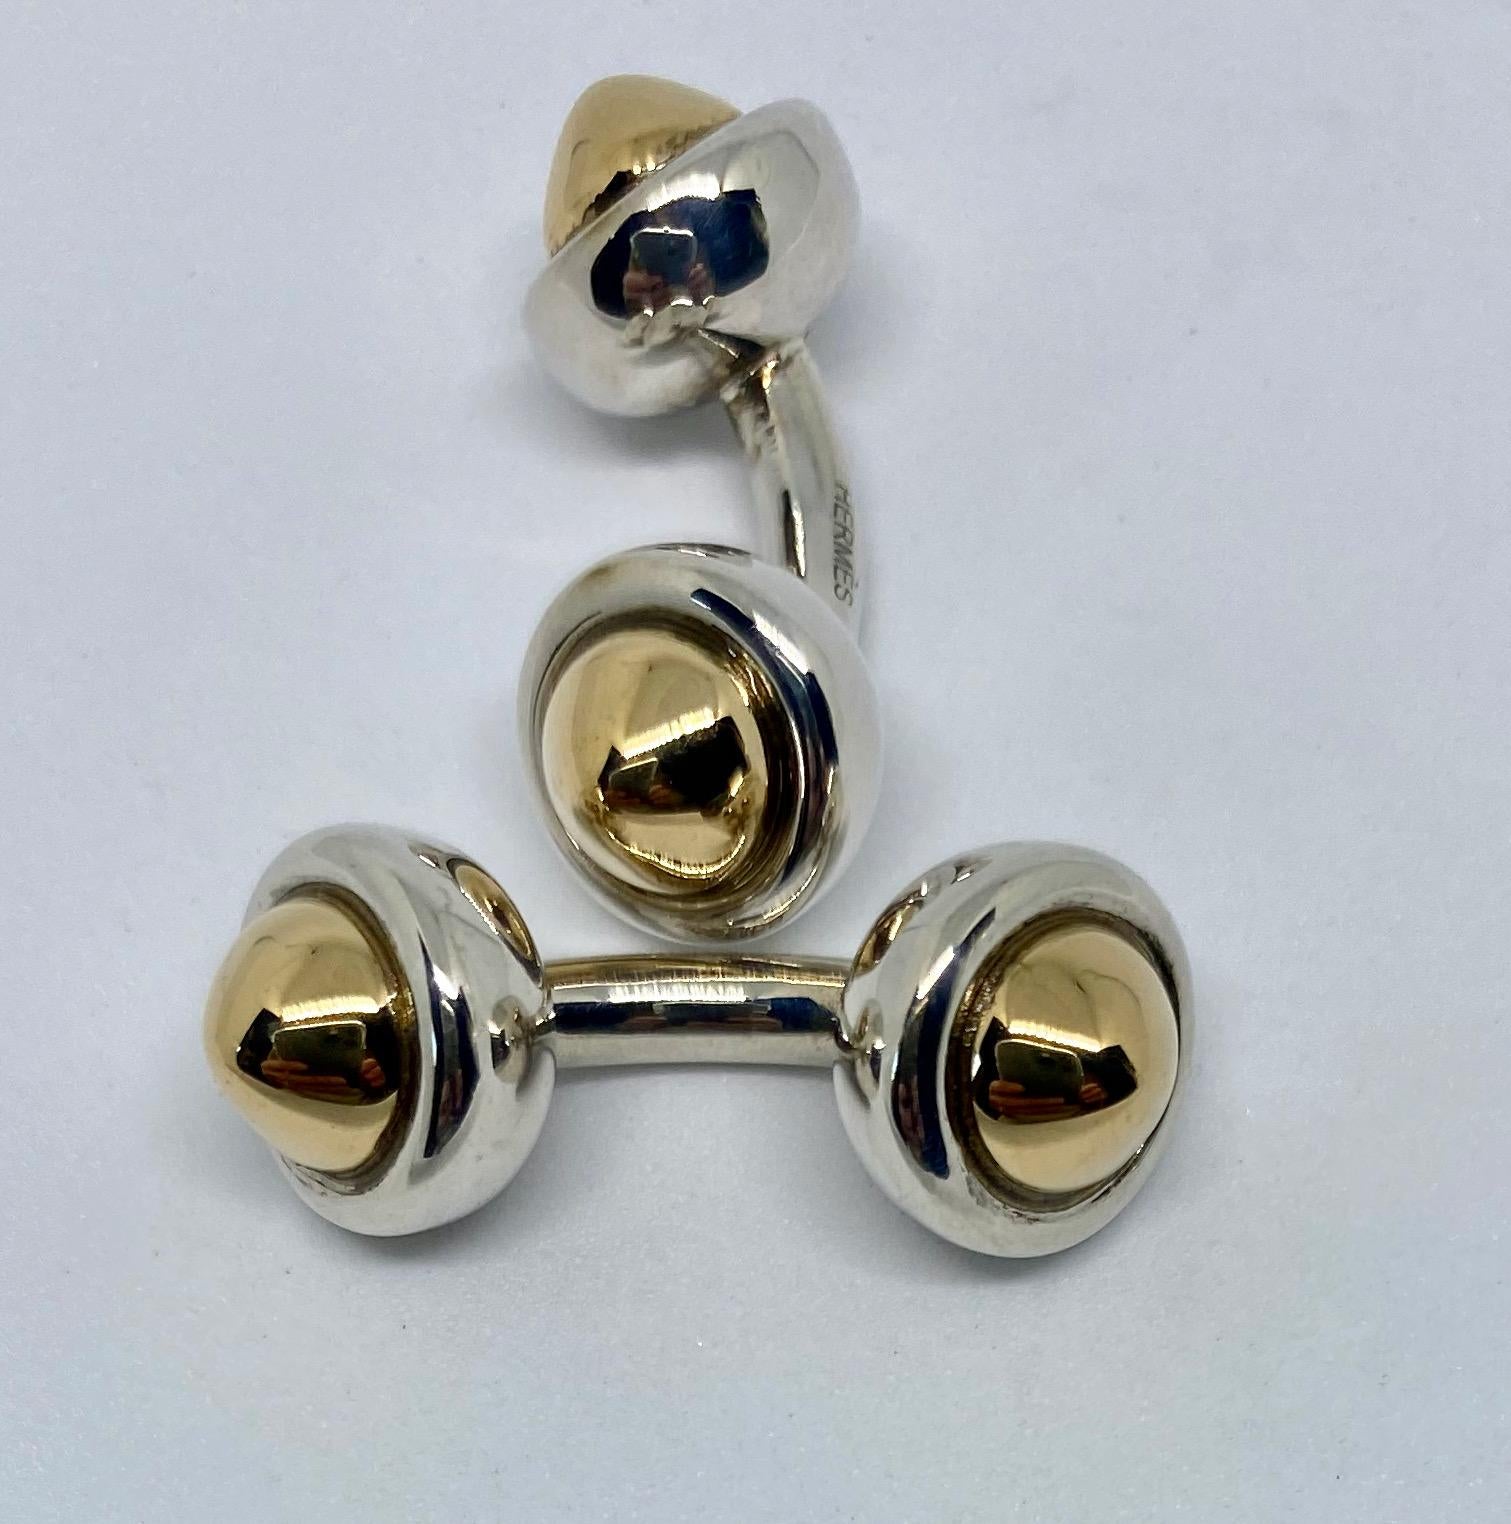 Extremely rare cufflinks in the 